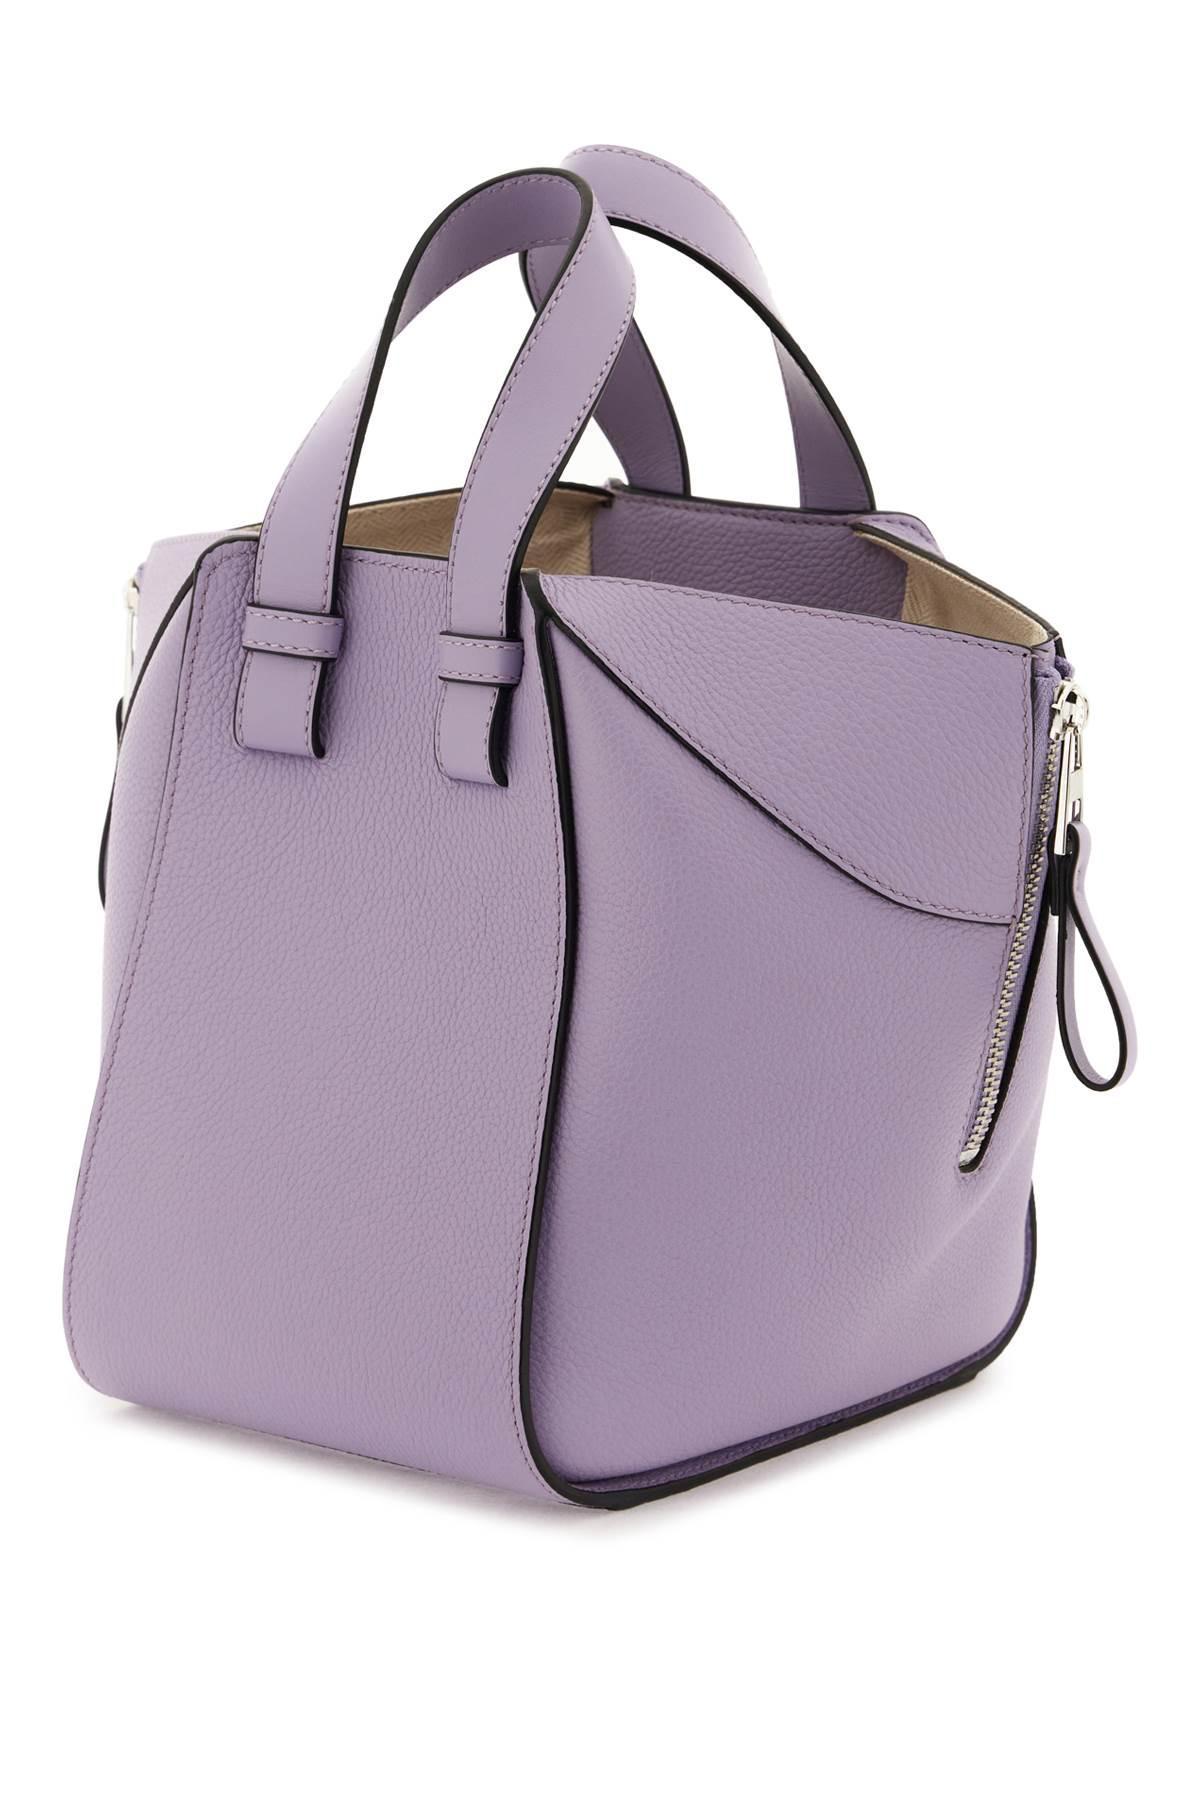  Compact Hammock Mauve Leather Bag , One Size For female(Purple)